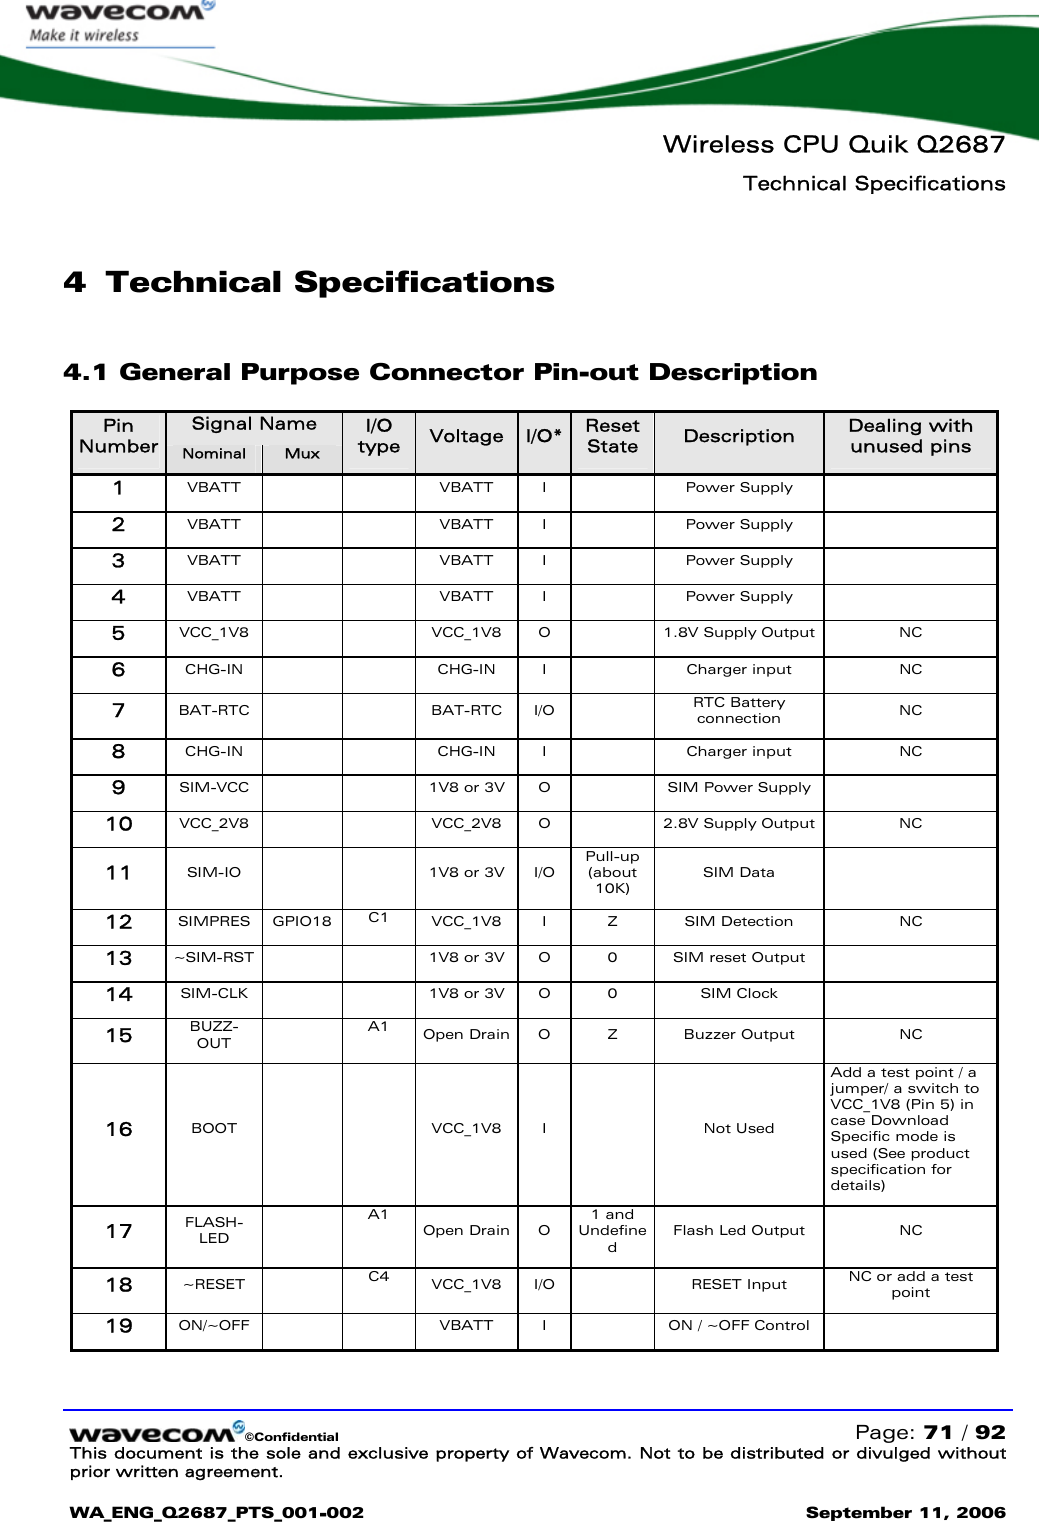   Wireless CPU Quik Q2687 Technical Specifications   ©Confidential   Page: 71 / 92 This document is the sole and exclusive property of Wavecom. Not to be distributed or divulged without prior written agreement.  WA_ENG_Q2687_PTS_001-002 September 11, 2006   4 Technical Specifications 4.1 General Purpose Connector Pin-out Description Signal Name Pin Number  Nominal  Mux I/O type  Voltage  I/O*  Reset State  Description  Dealing with unused pins 1  VBATT    VBATT I    Power Supply   2  VBATT    VBATT I    Power Supply   3  VBATT    VBATT I    Power Supply   4  VBATT    VBATT I    Power Supply   5  VCC_1V8    VCC_1V8 O    1.8V Supply Output  NC 6  CHG-IN    CHG-IN I    Charger input  NC 7  BAT-RTC    BAT-RTC I/O    RTC Battery connection  NC 8  CHG-IN    CHG-IN I    Charger input  NC 9  SIM-VCC    1V8 or 3V  O    SIM Power Supply   10  VCC_2V8    VCC_2V8 O    2.8V Supply Output  NC 11  SIM-IO   1V8 or 3V  I/O Pull-up (about 10K) SIM Data   12  SIMPRES GPIO18  C1  VCC_1V8 I  Z  SIM Detection  NC 13  ~SIM-RST    1V8 or 3V  O  0  SIM reset Output   14  SIM-CLK    1V8 or 3V  O  0  SIM Clock   15  BUZZ-OUT   A1  Open Drain  O  Z  Buzzer Output  NC 16  BOOT   VCC_1V8 I    Not Used Add a test point / a jumper/ a switch to VCC_1V8 (Pin 5) in case Download Specific mode is used (See product specification for details) 17  FLASH-LED   A1 Open Drain  O 1 and Undefined Flash Led Output  NC 18  ~RESET   C4  VCC_1V8 I/O    RESET Input  NC or add a test point 19  ON/~OFF    VBATT  I    ON / ~OFF Control   